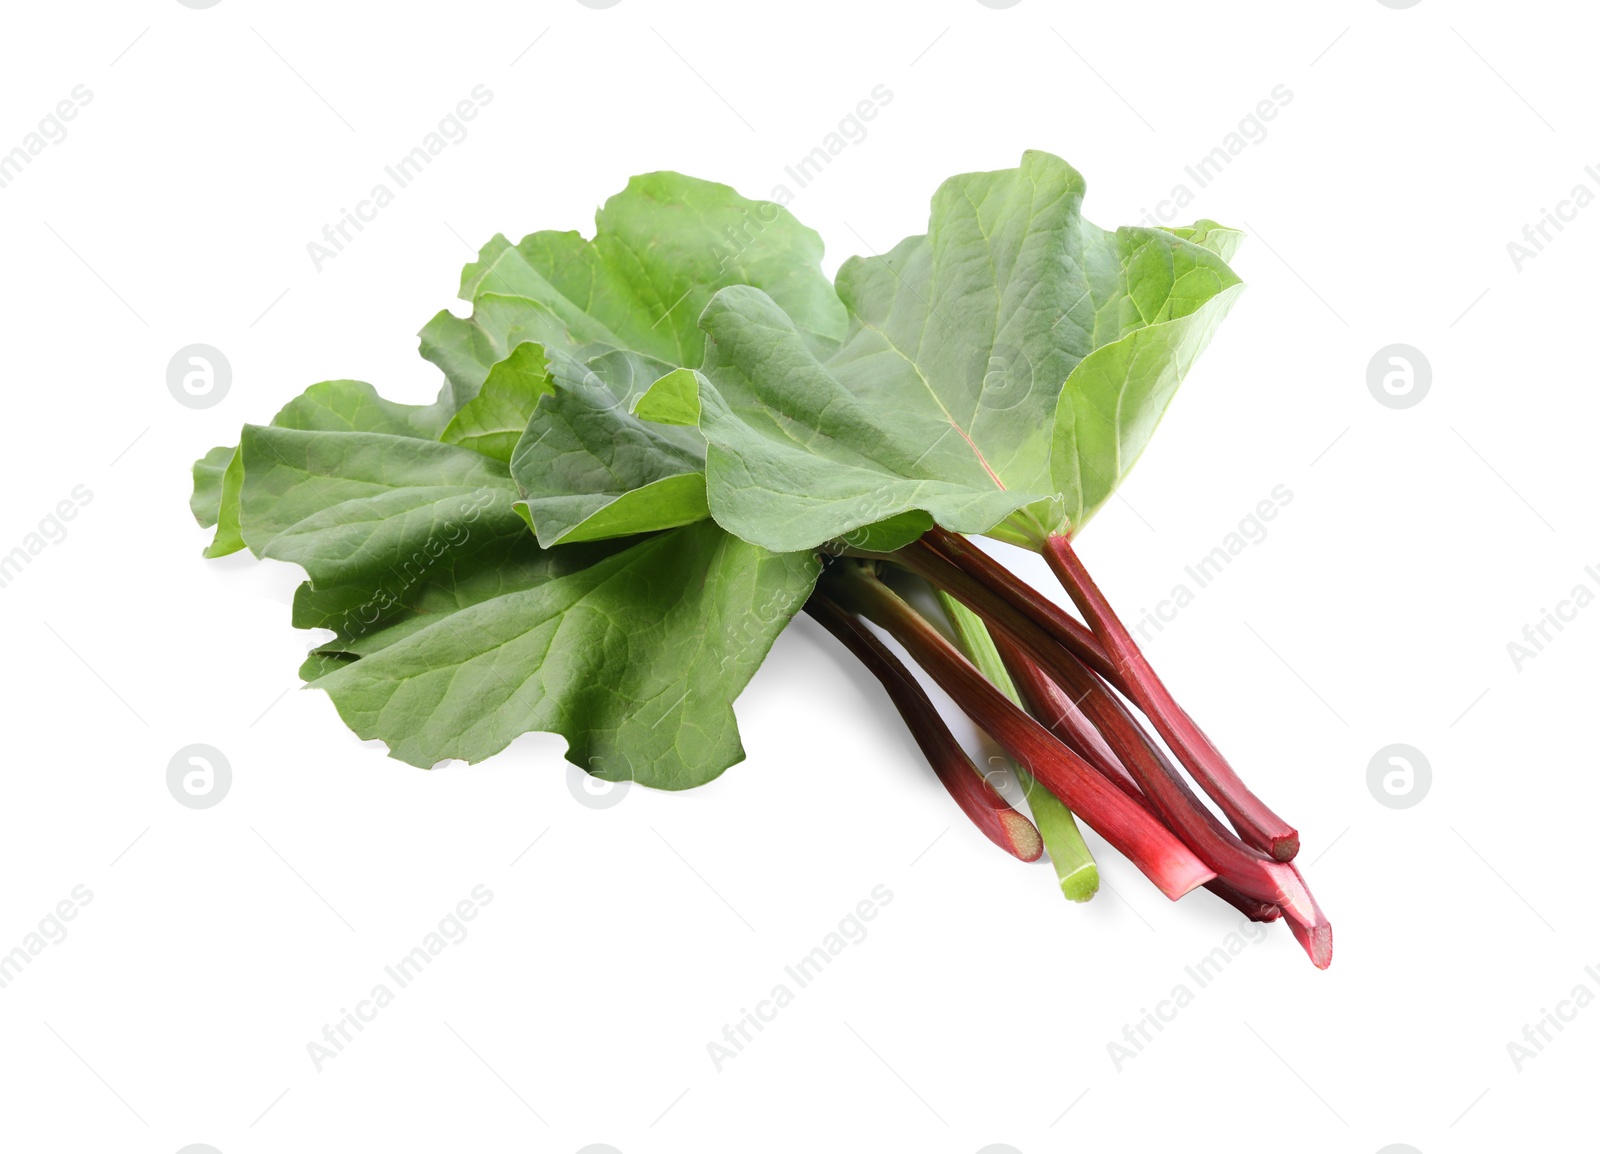 Photo of Fresh rhubarb stalks with leaves isolated on white